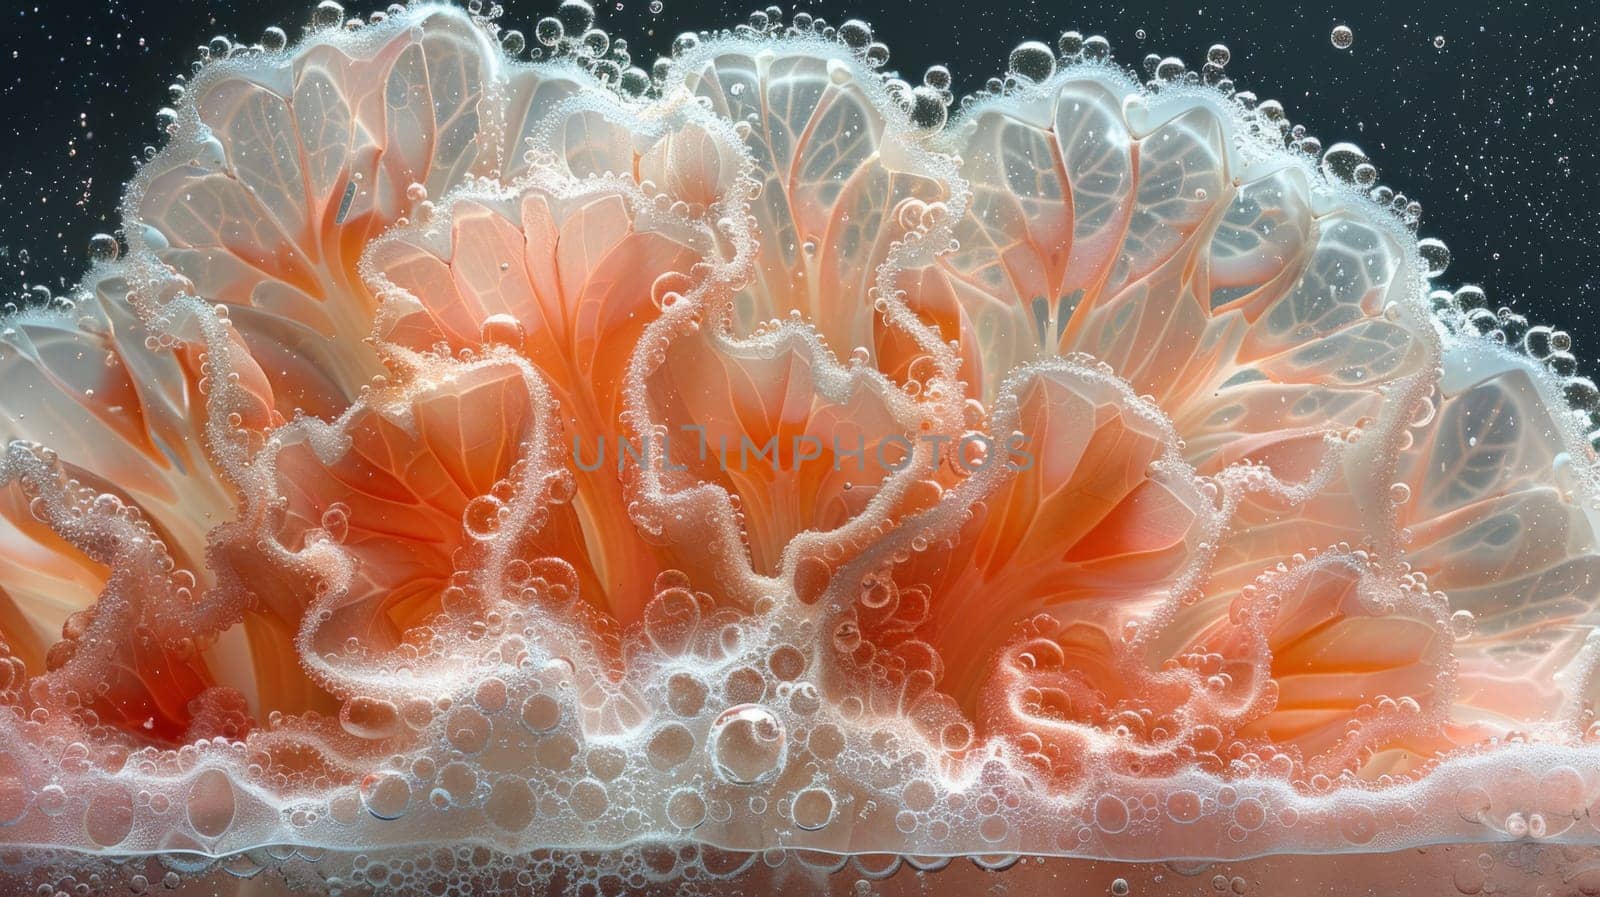 A close up of a flower with bubbles around it